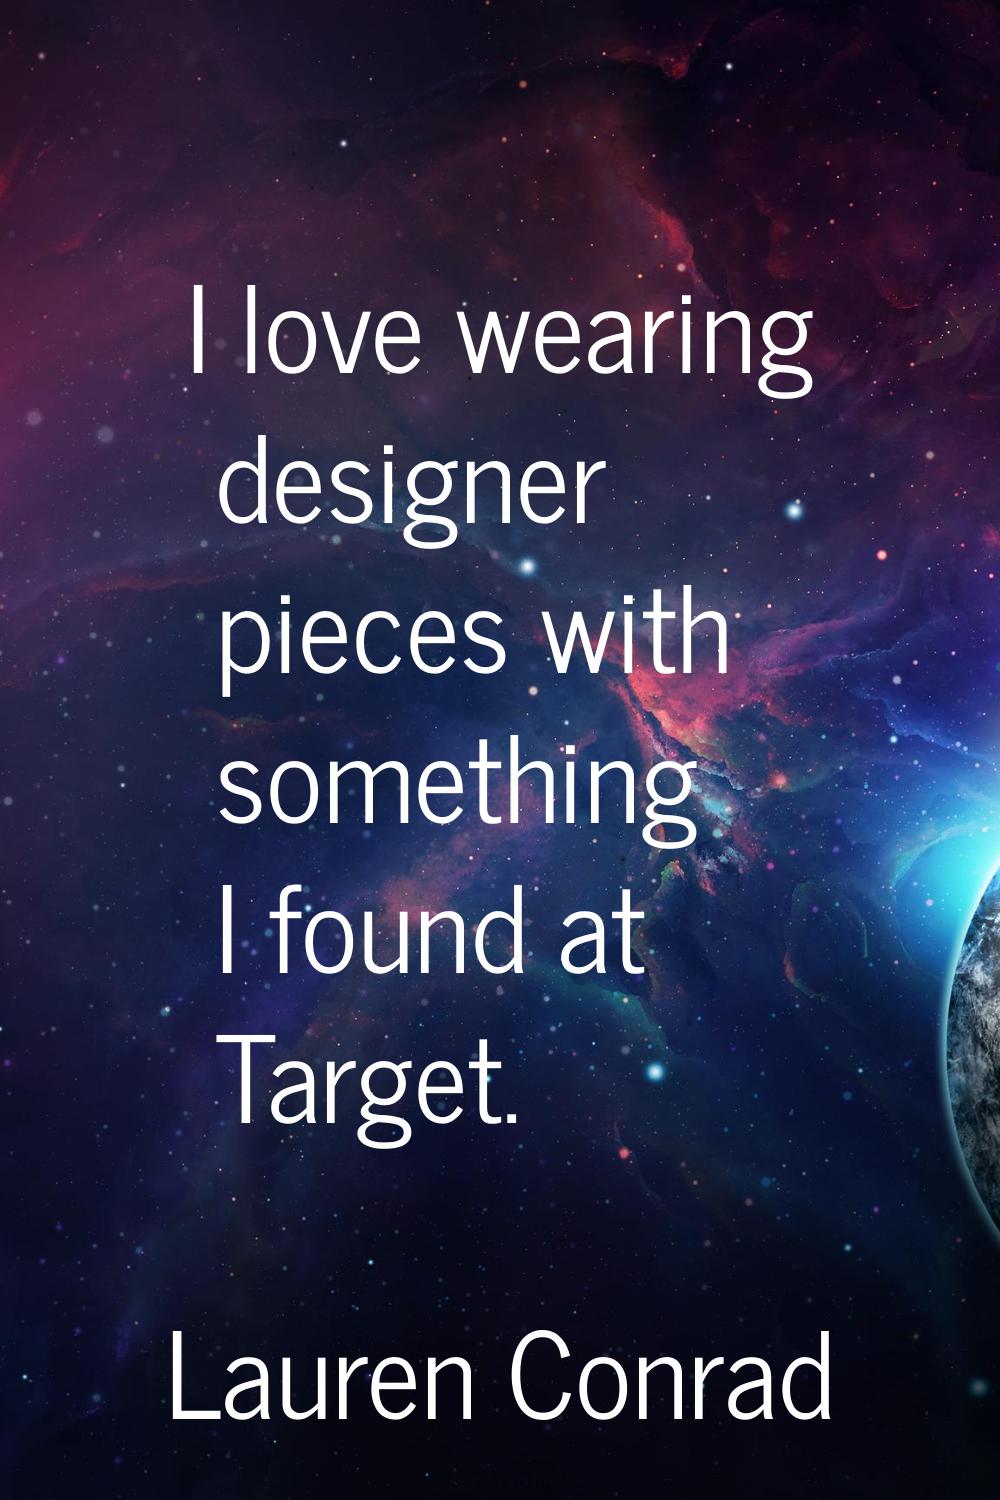 I love wearing designer pieces with something I found at Target.